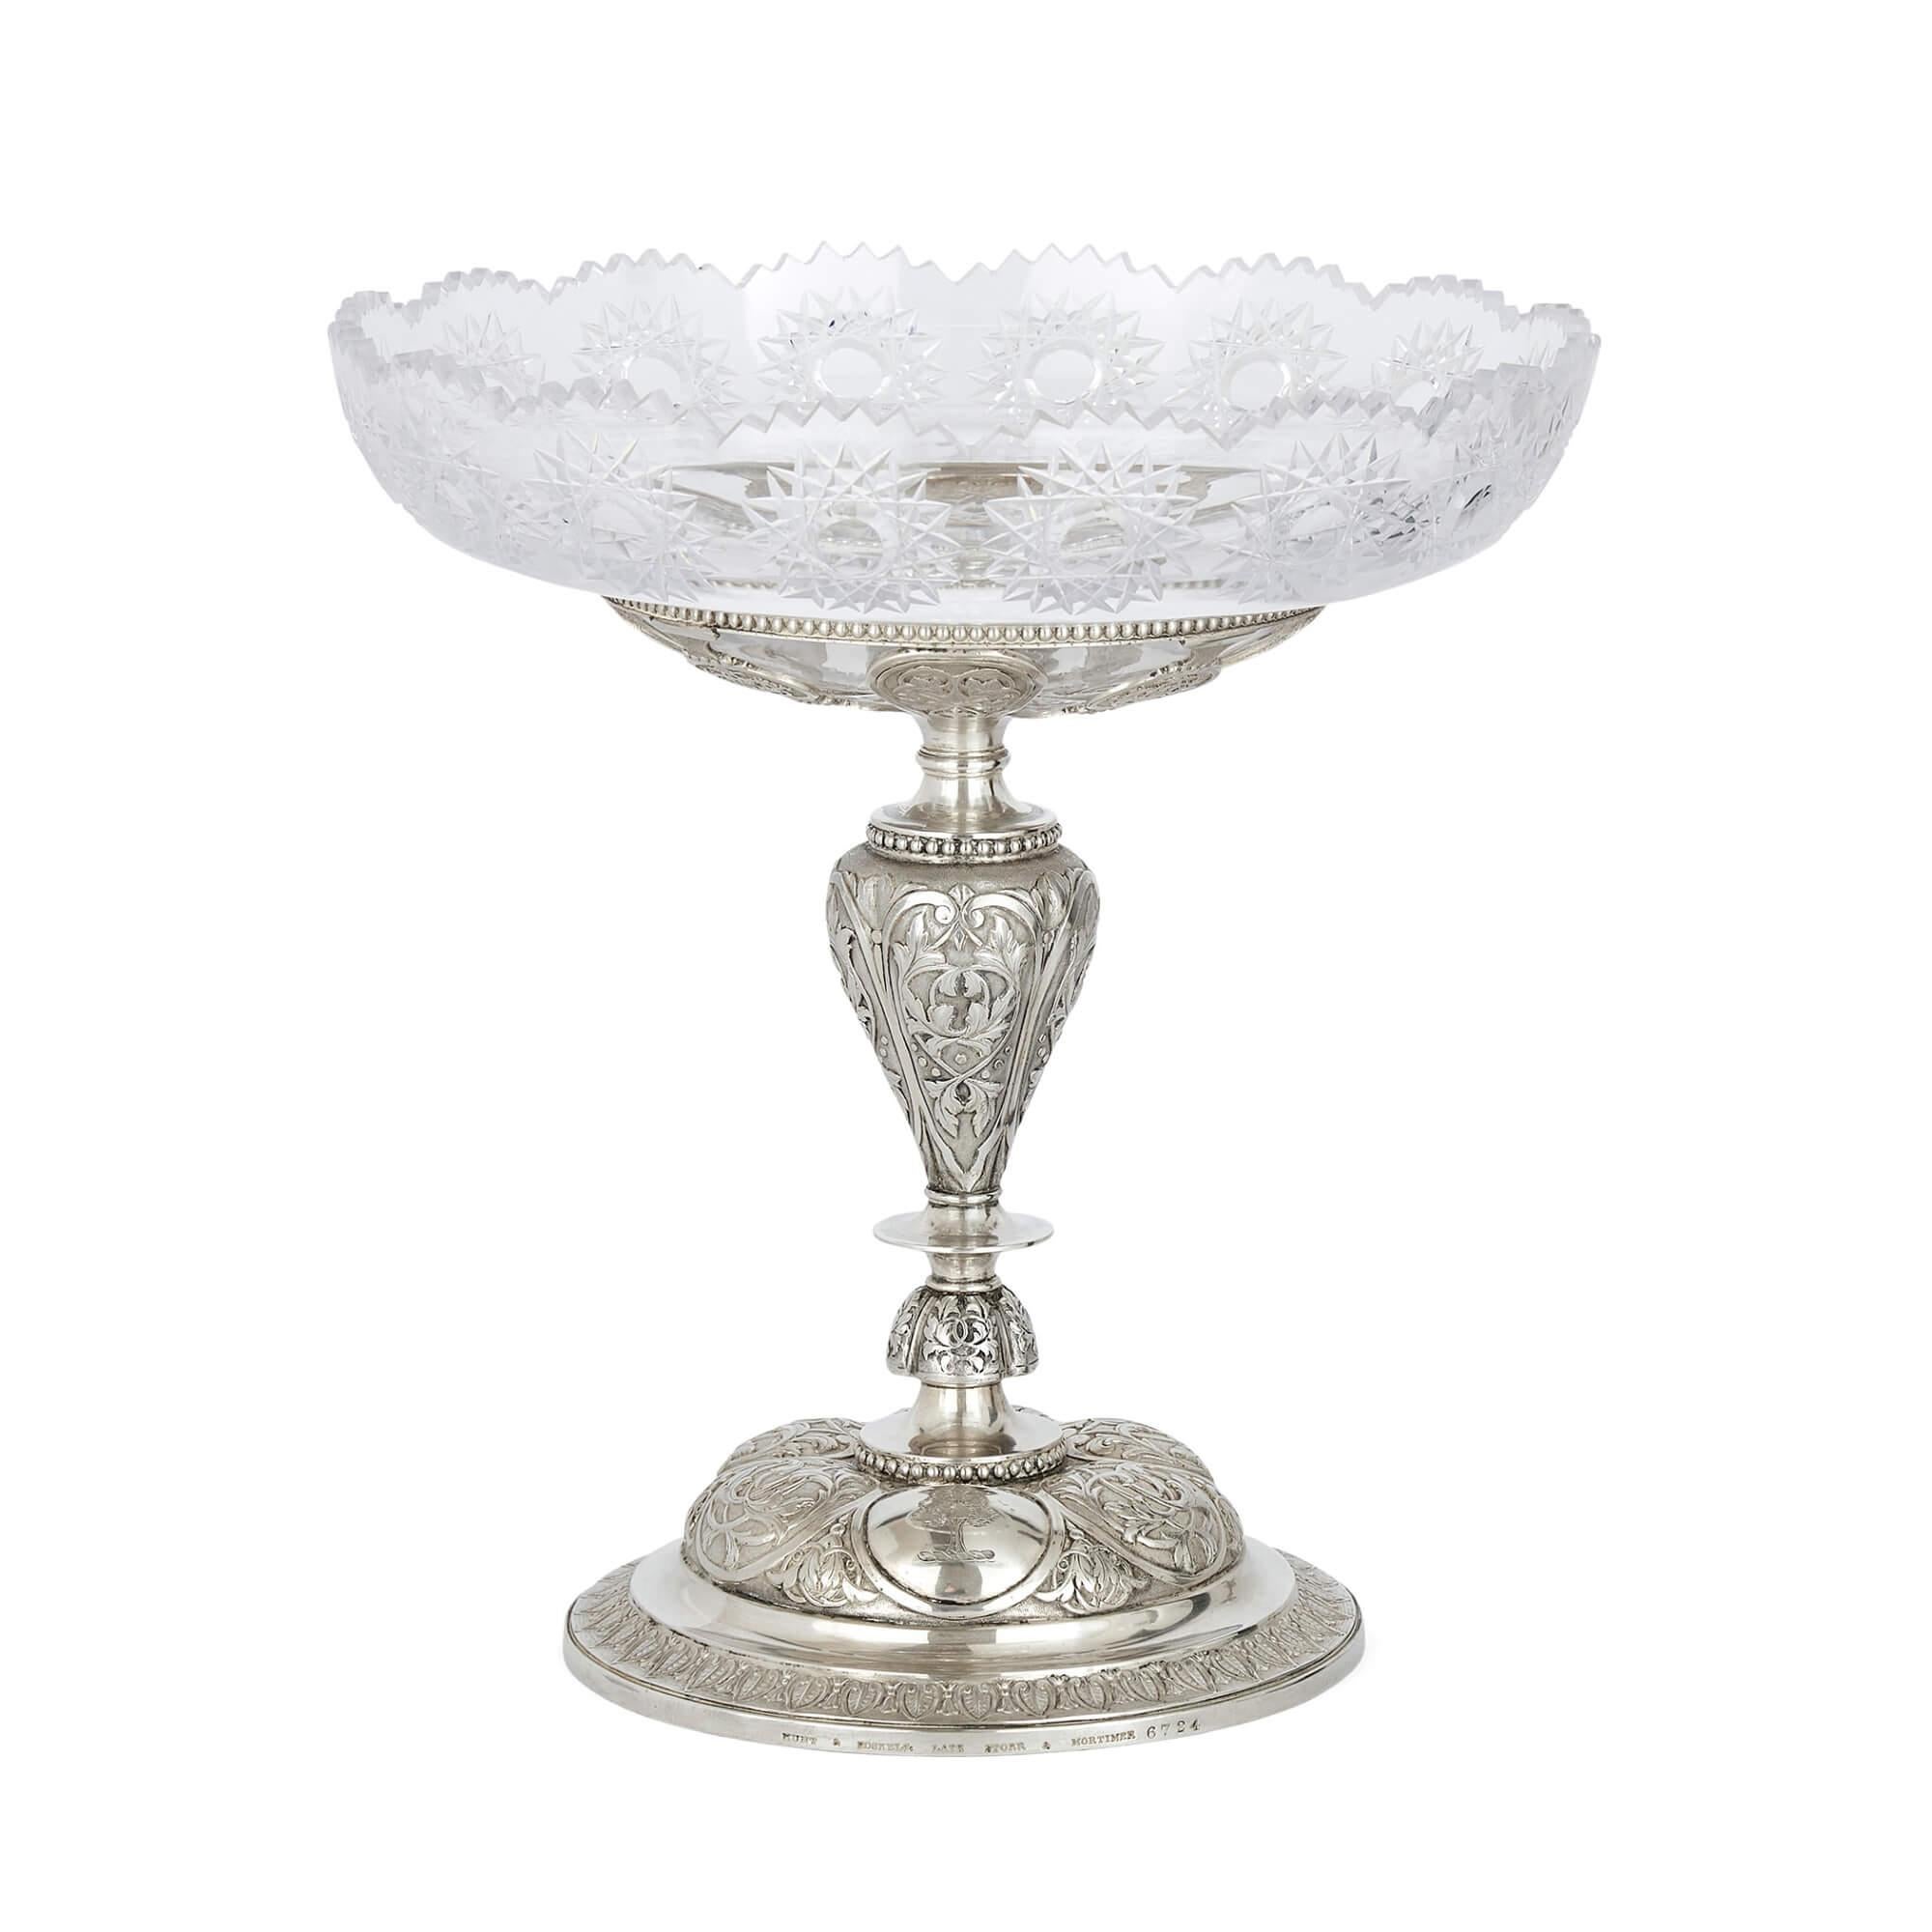 Set of four Victorian silver stands by Hunt & Roskell, London
English, 1874,
Measures: Height 27cm, diameter 24cm

These stunning silver works were made in 1874 by the leading London firm, Hunt & Roskell, successors to Mortimer and Hunt as the